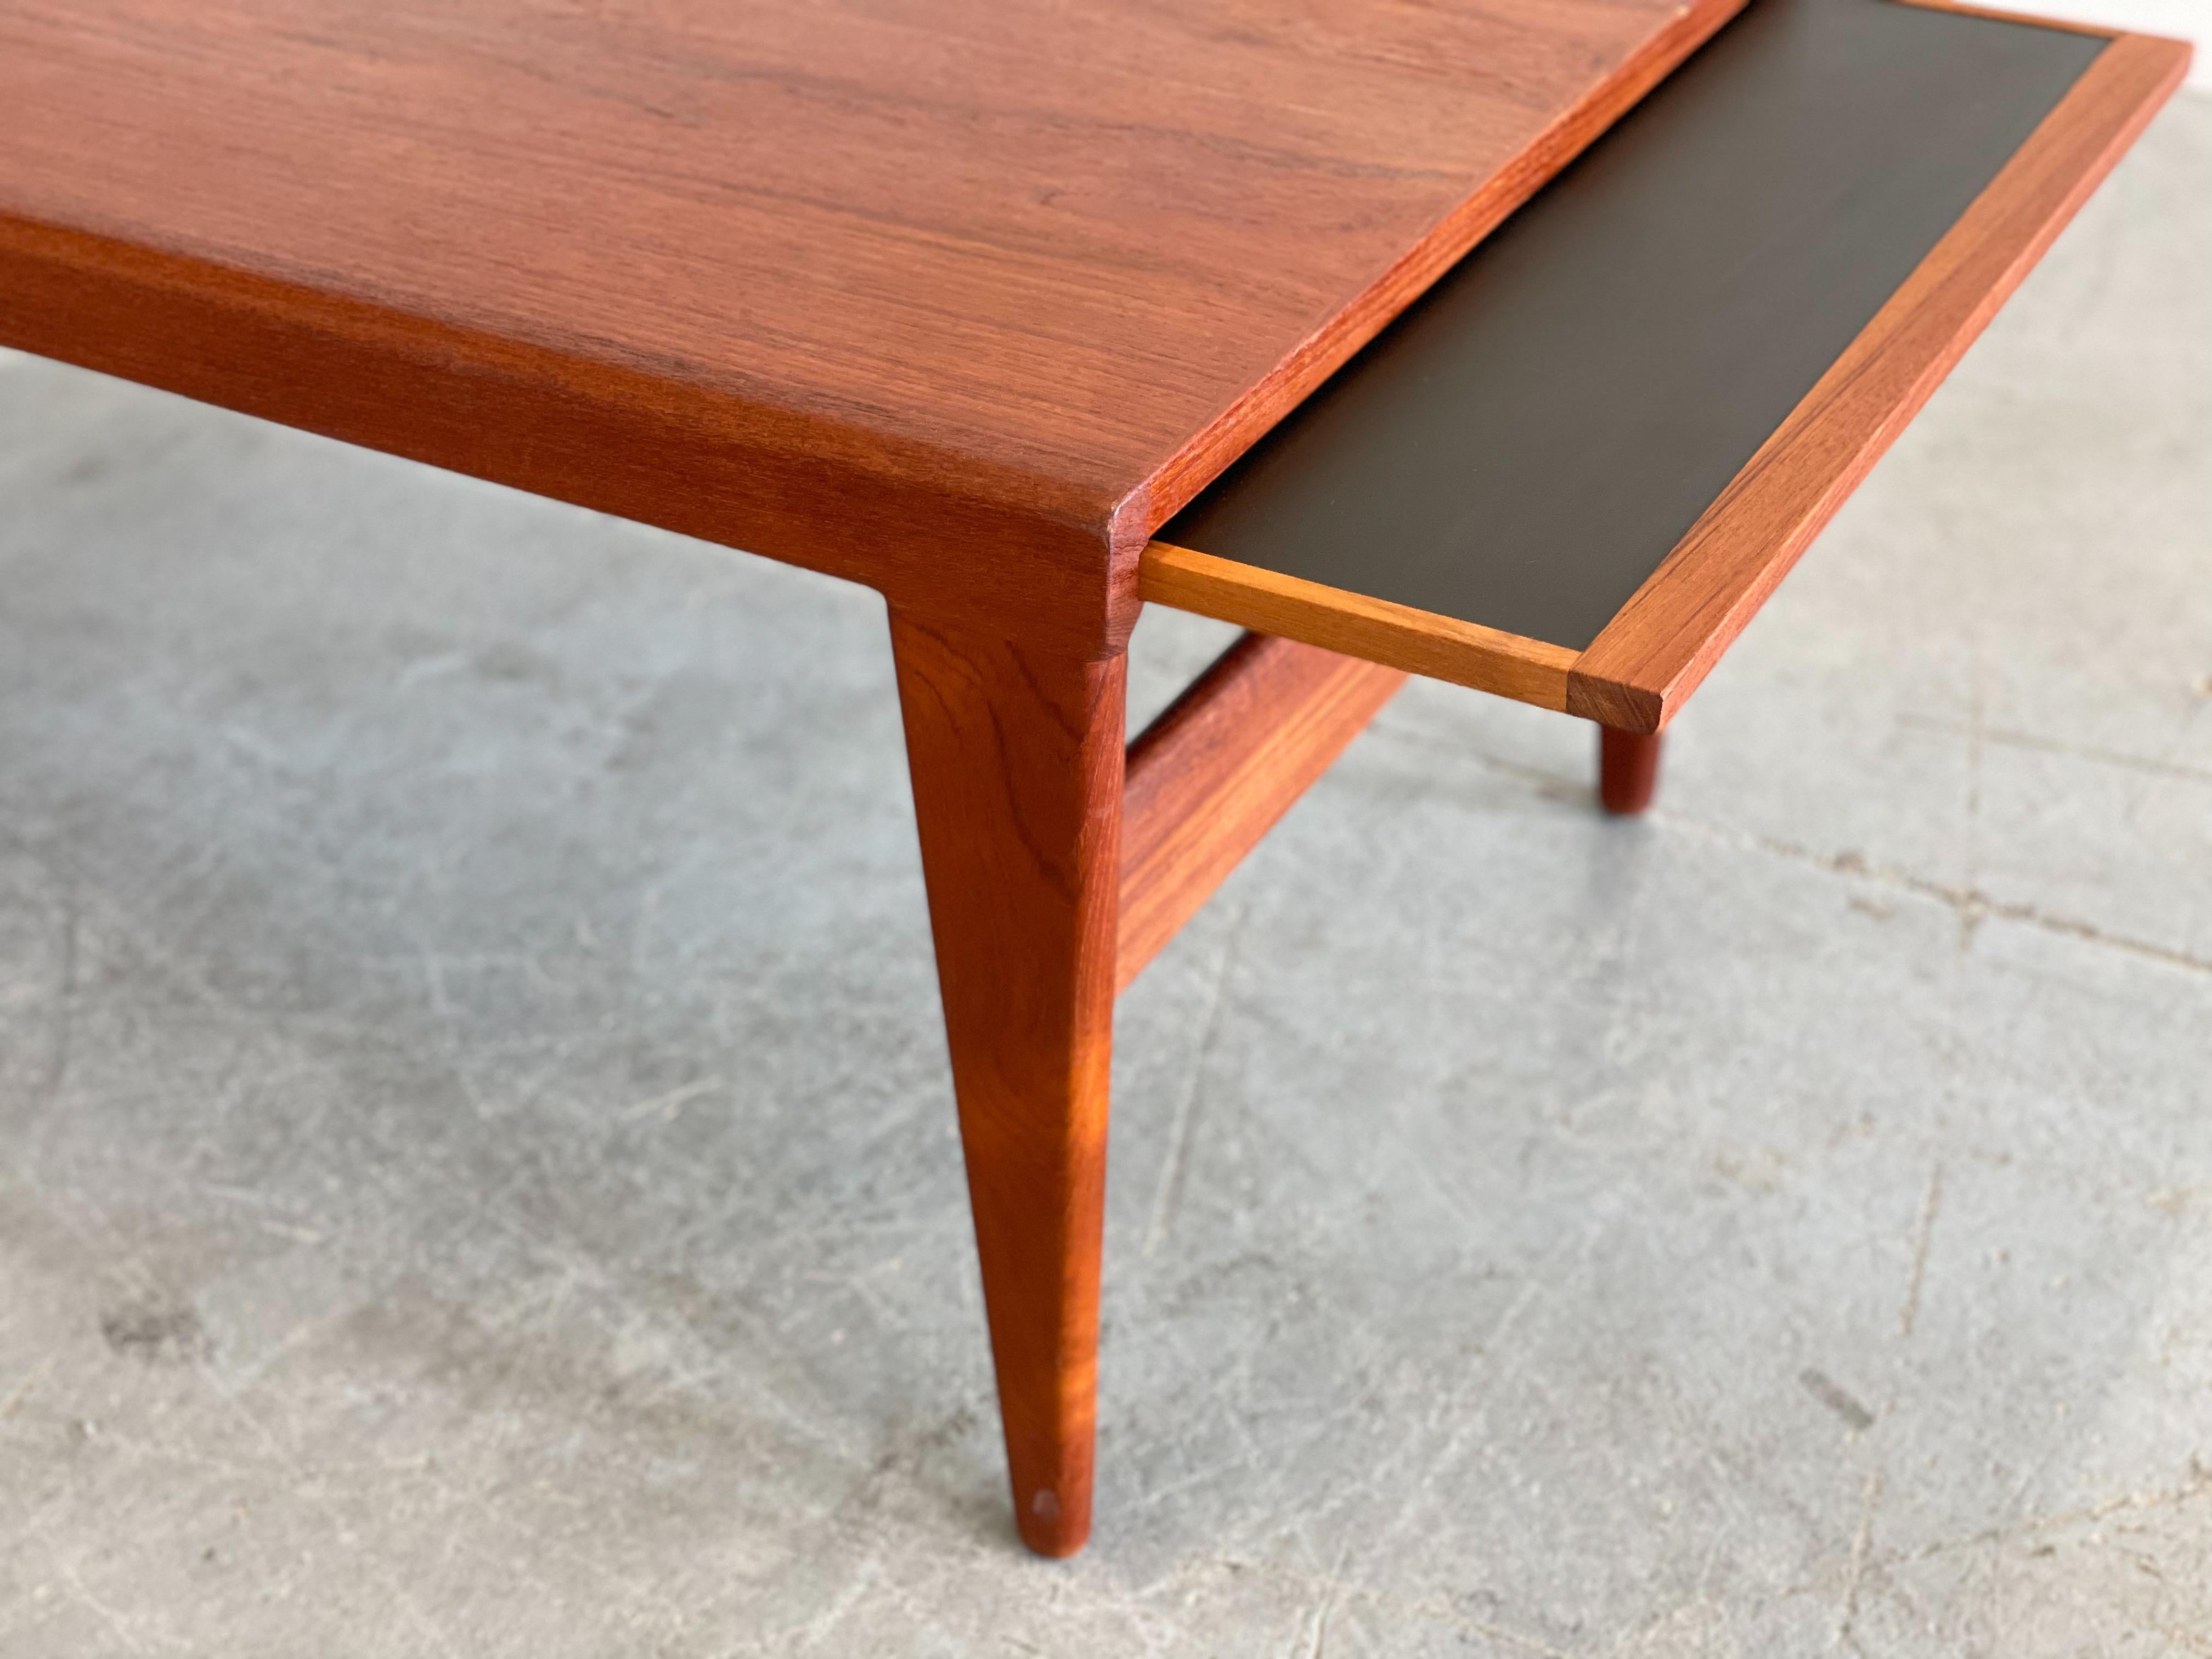 Illum Wikkelso Expanding Teak Coffee Table for Kofoeds Mobelfabrik In Good Condition For Sale In Winnipeg, MB